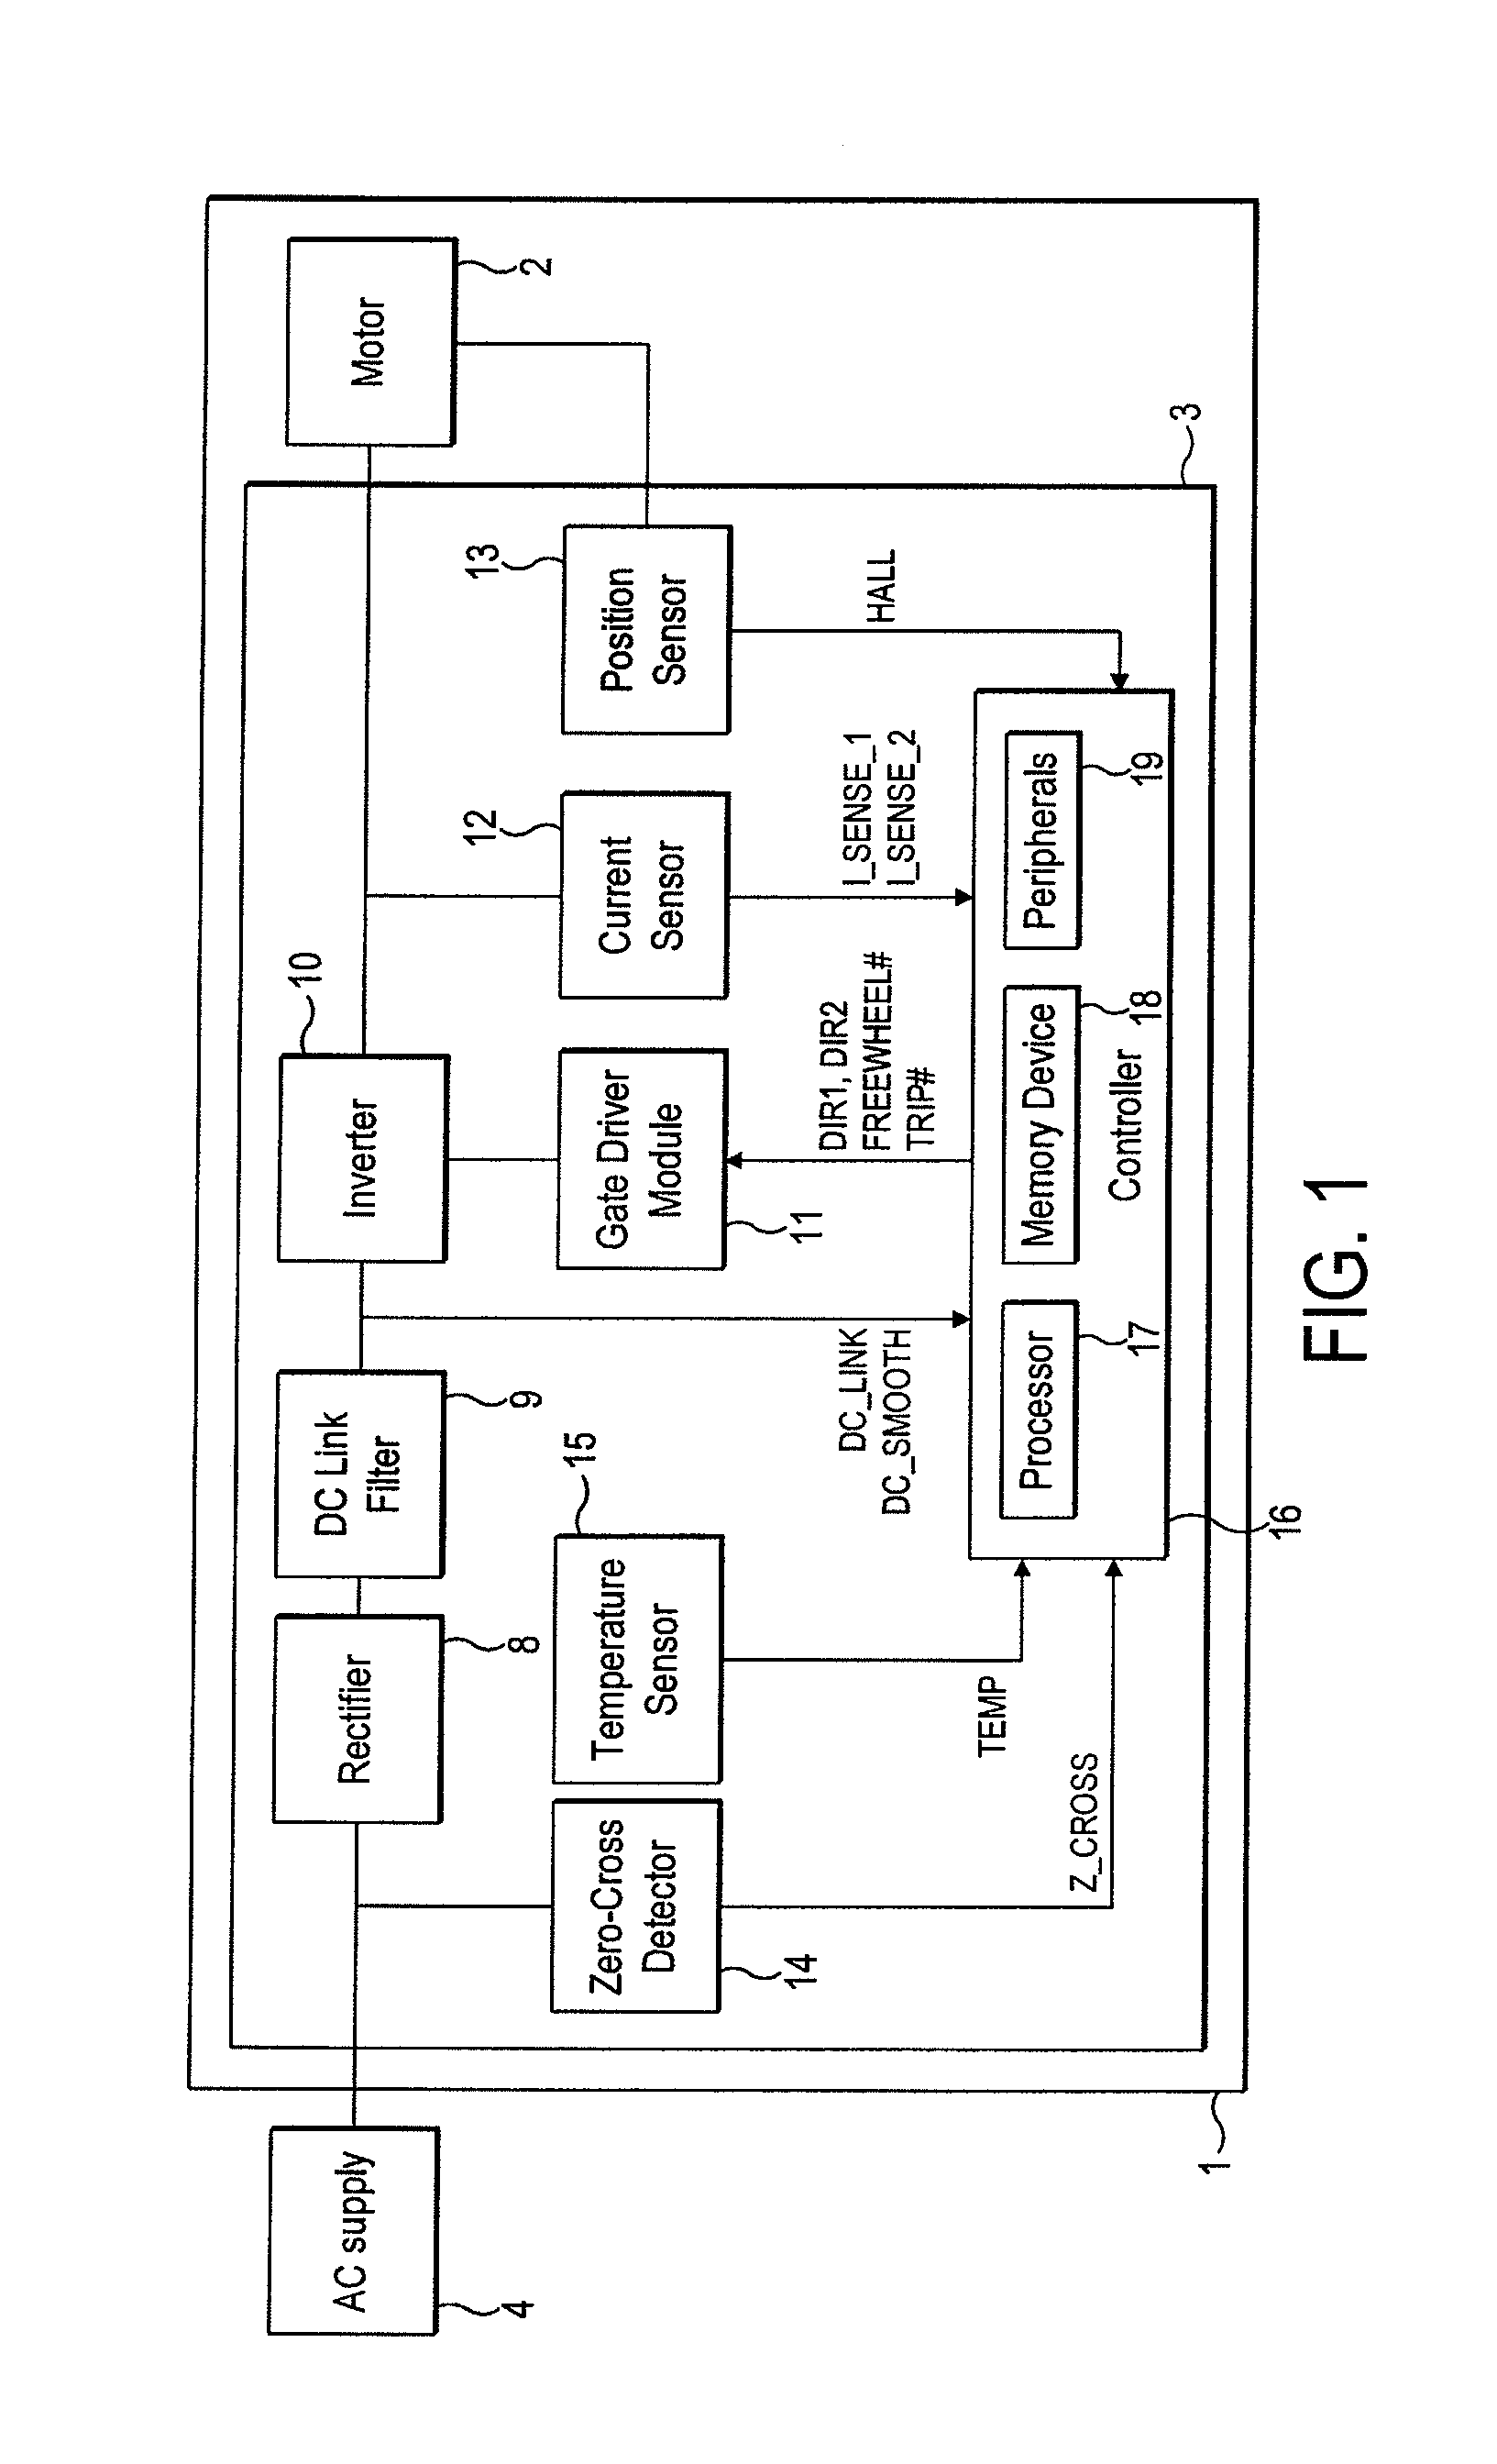 Control of a brushless permanent-magnet motor